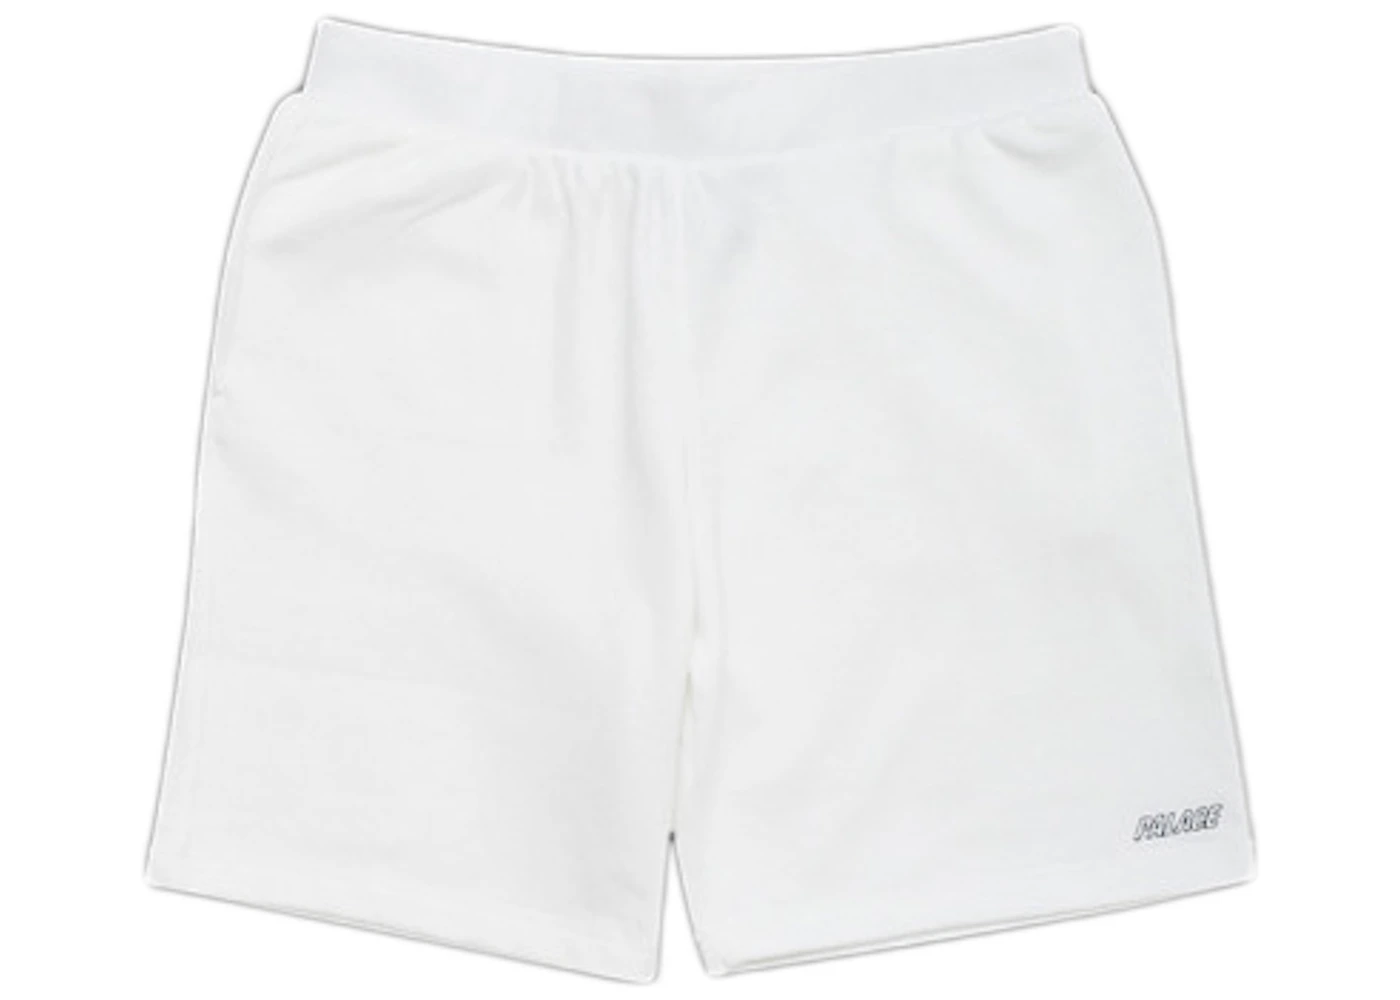 Palace Classic Track Short White - SS15 Men's - GB